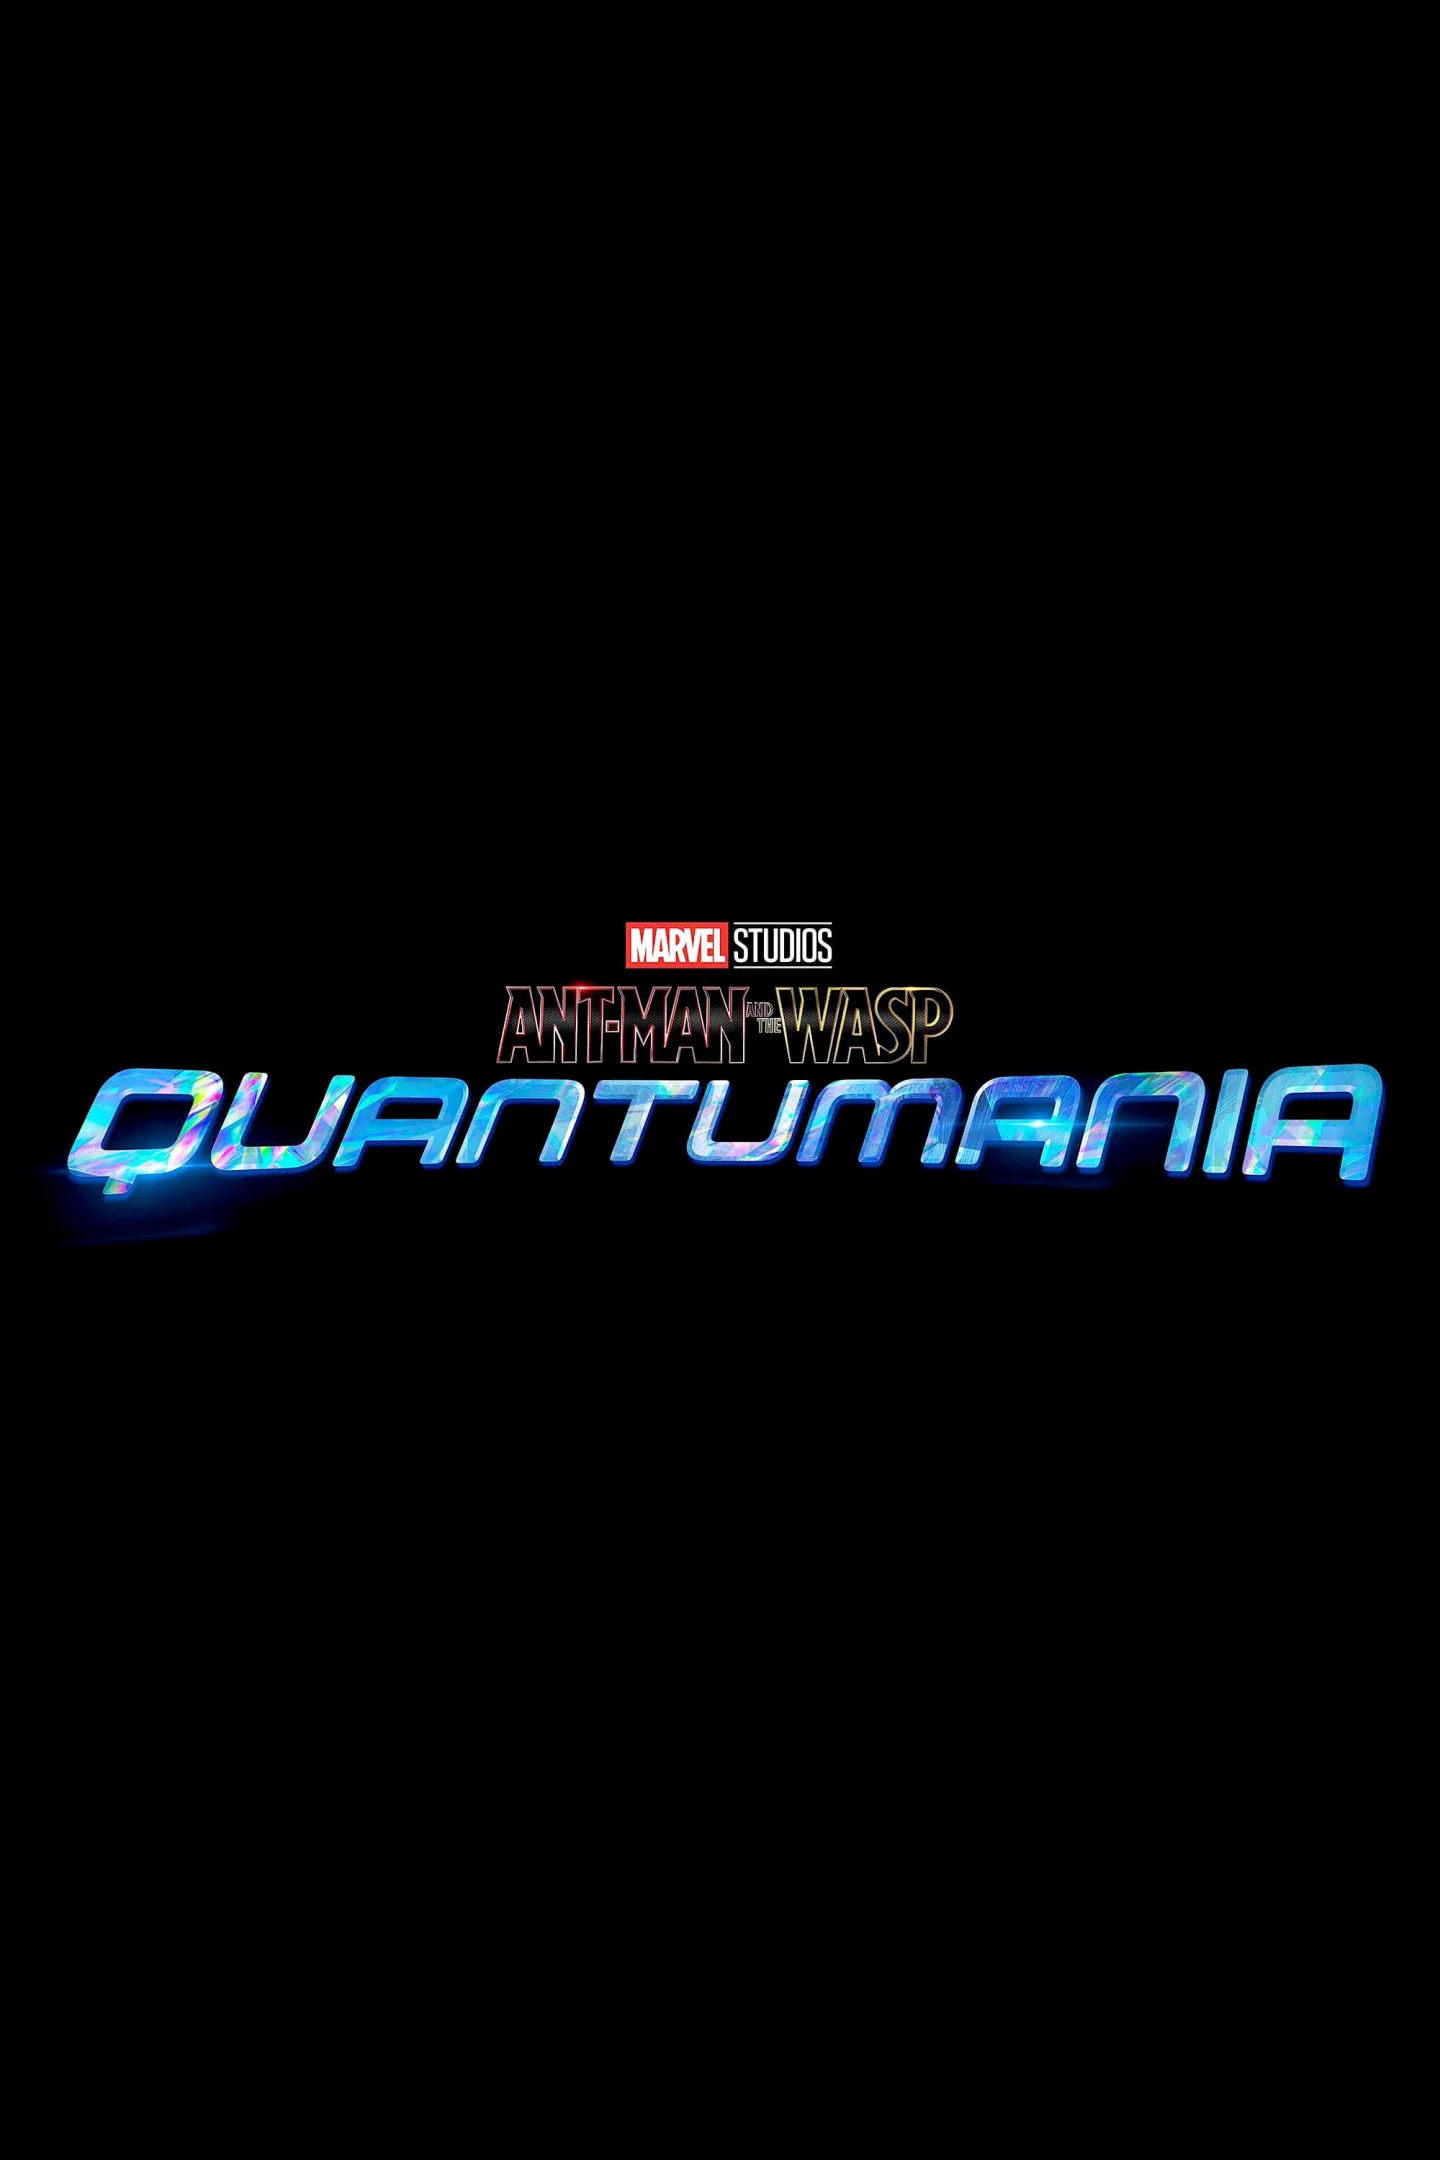 Photo 4 du film : Ant-Man and the Wasp : Quantumania